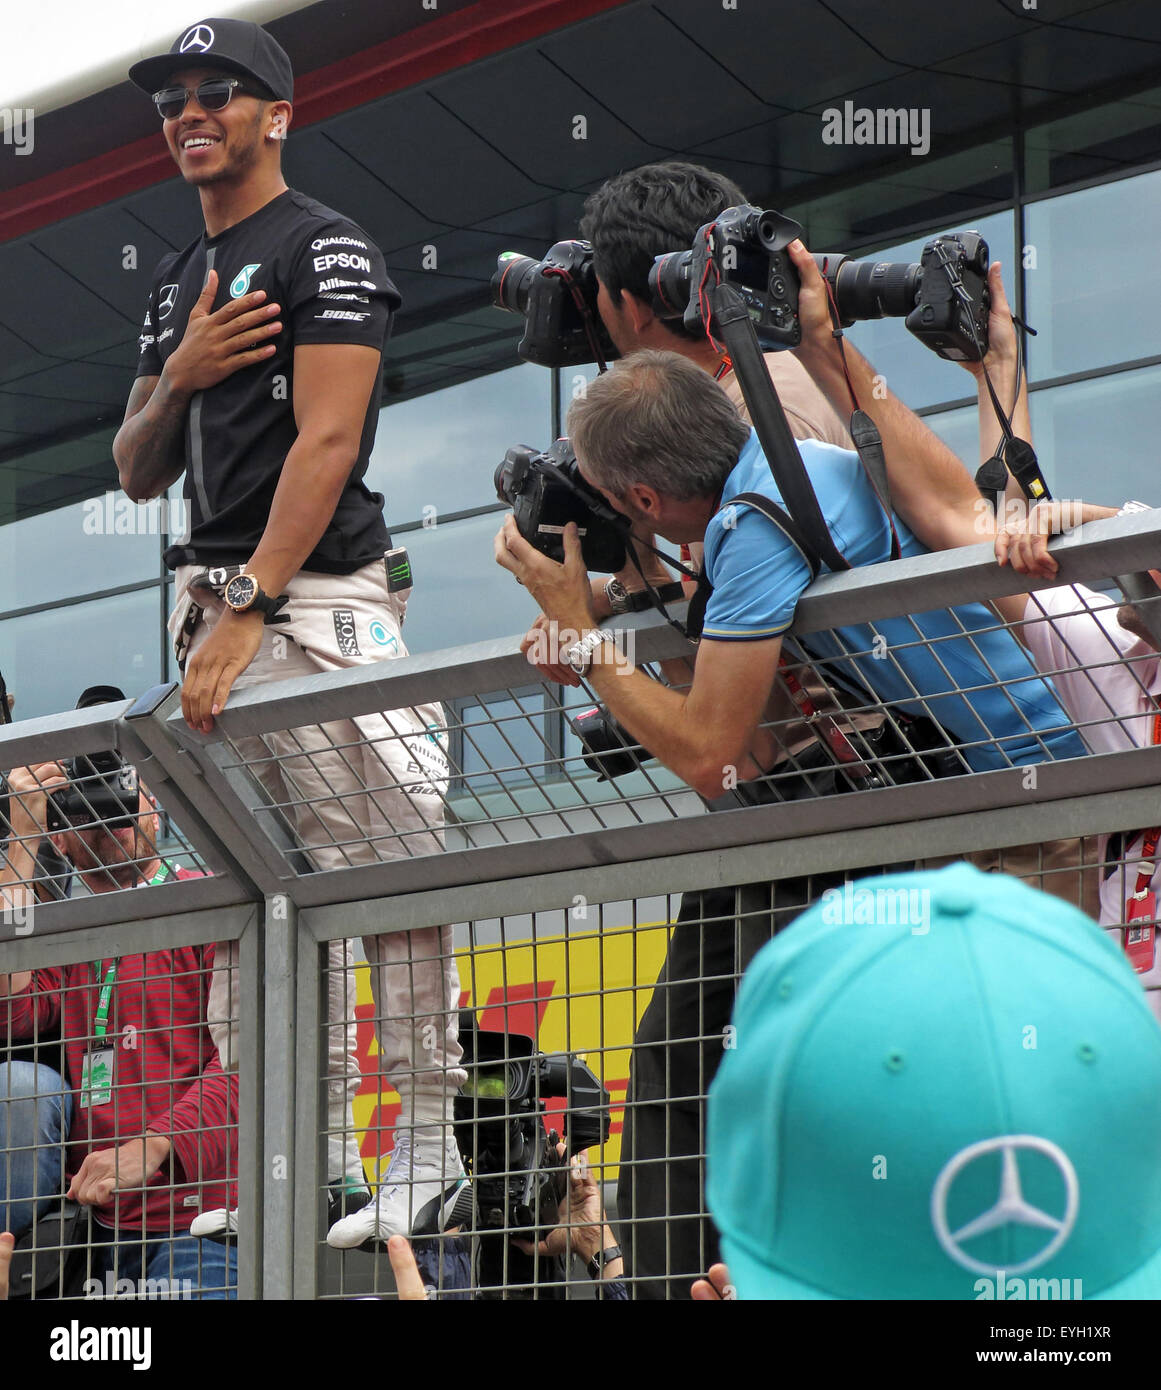 Lewis Hamilton smiling after win, in the pit area,Silverstone British F1 Grand Prix 2015 Stock Photo